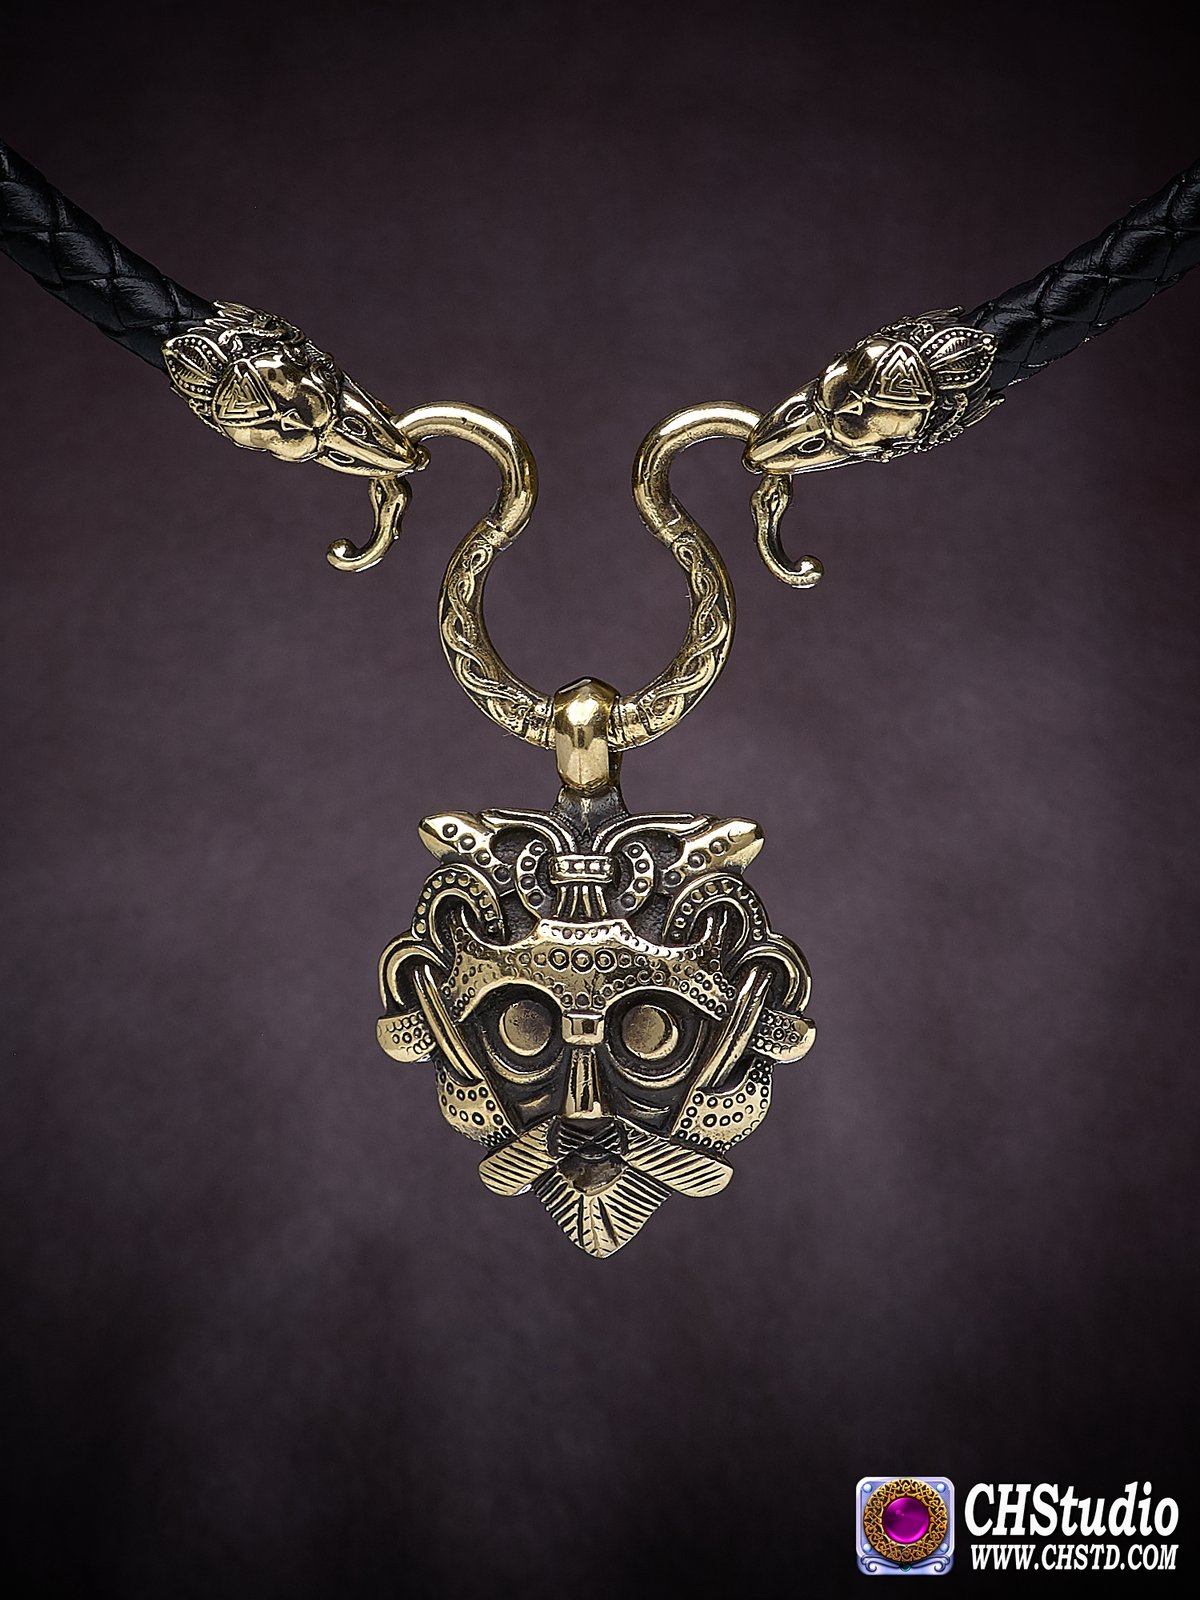 Odin's Mask + Leather necklace with raven heads at the ends ( 6 mm cord).